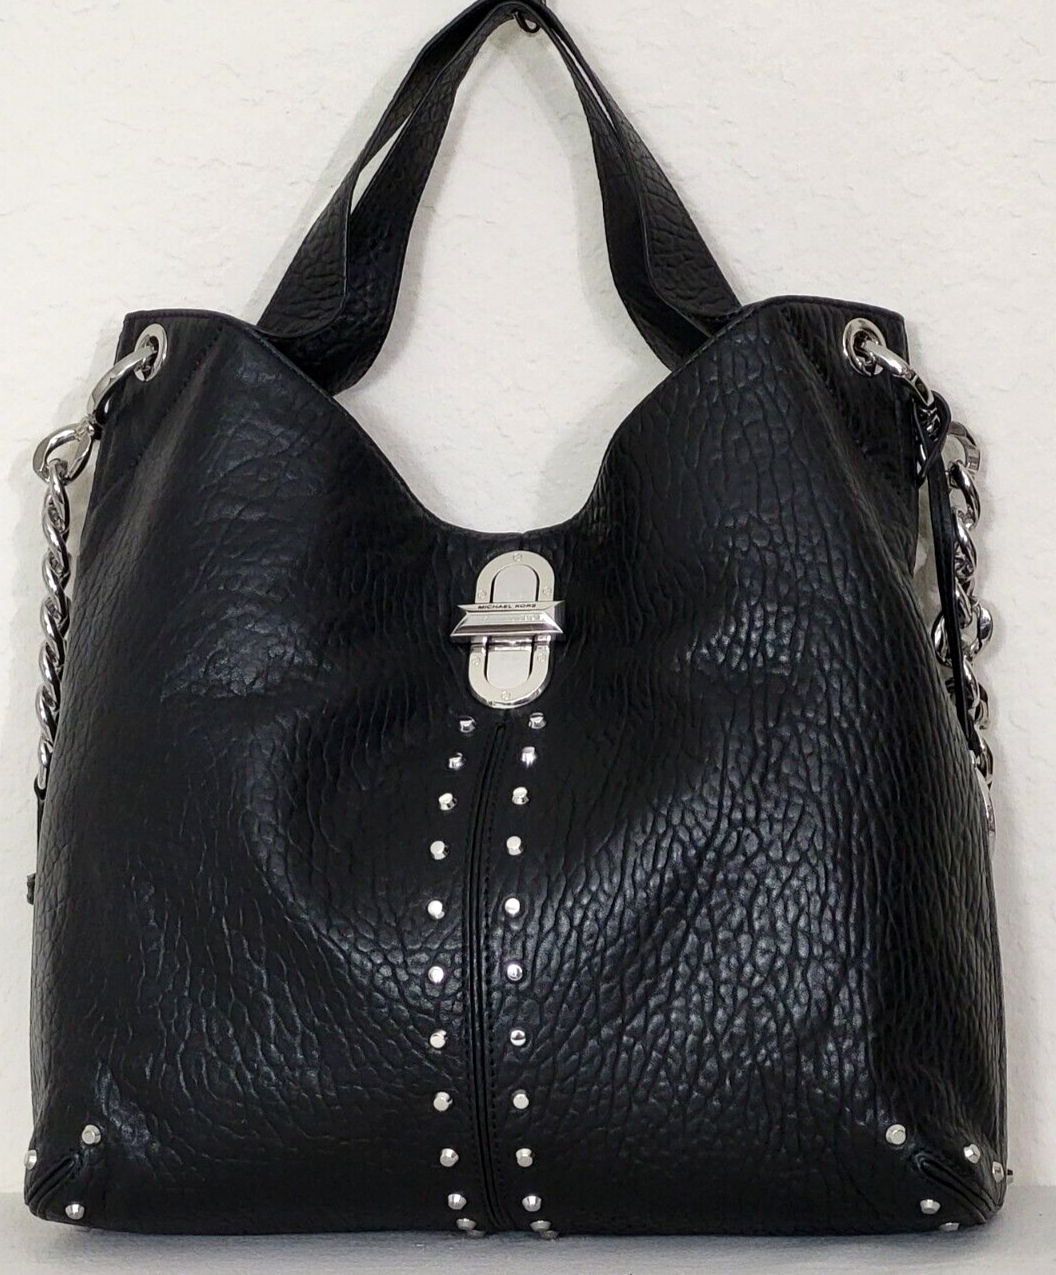 Primary image for MICHAEL KORS UPTOWN ASTOR LEGACY STUDDED BLACK LEATHER LARGE TOTE BAGNWT!